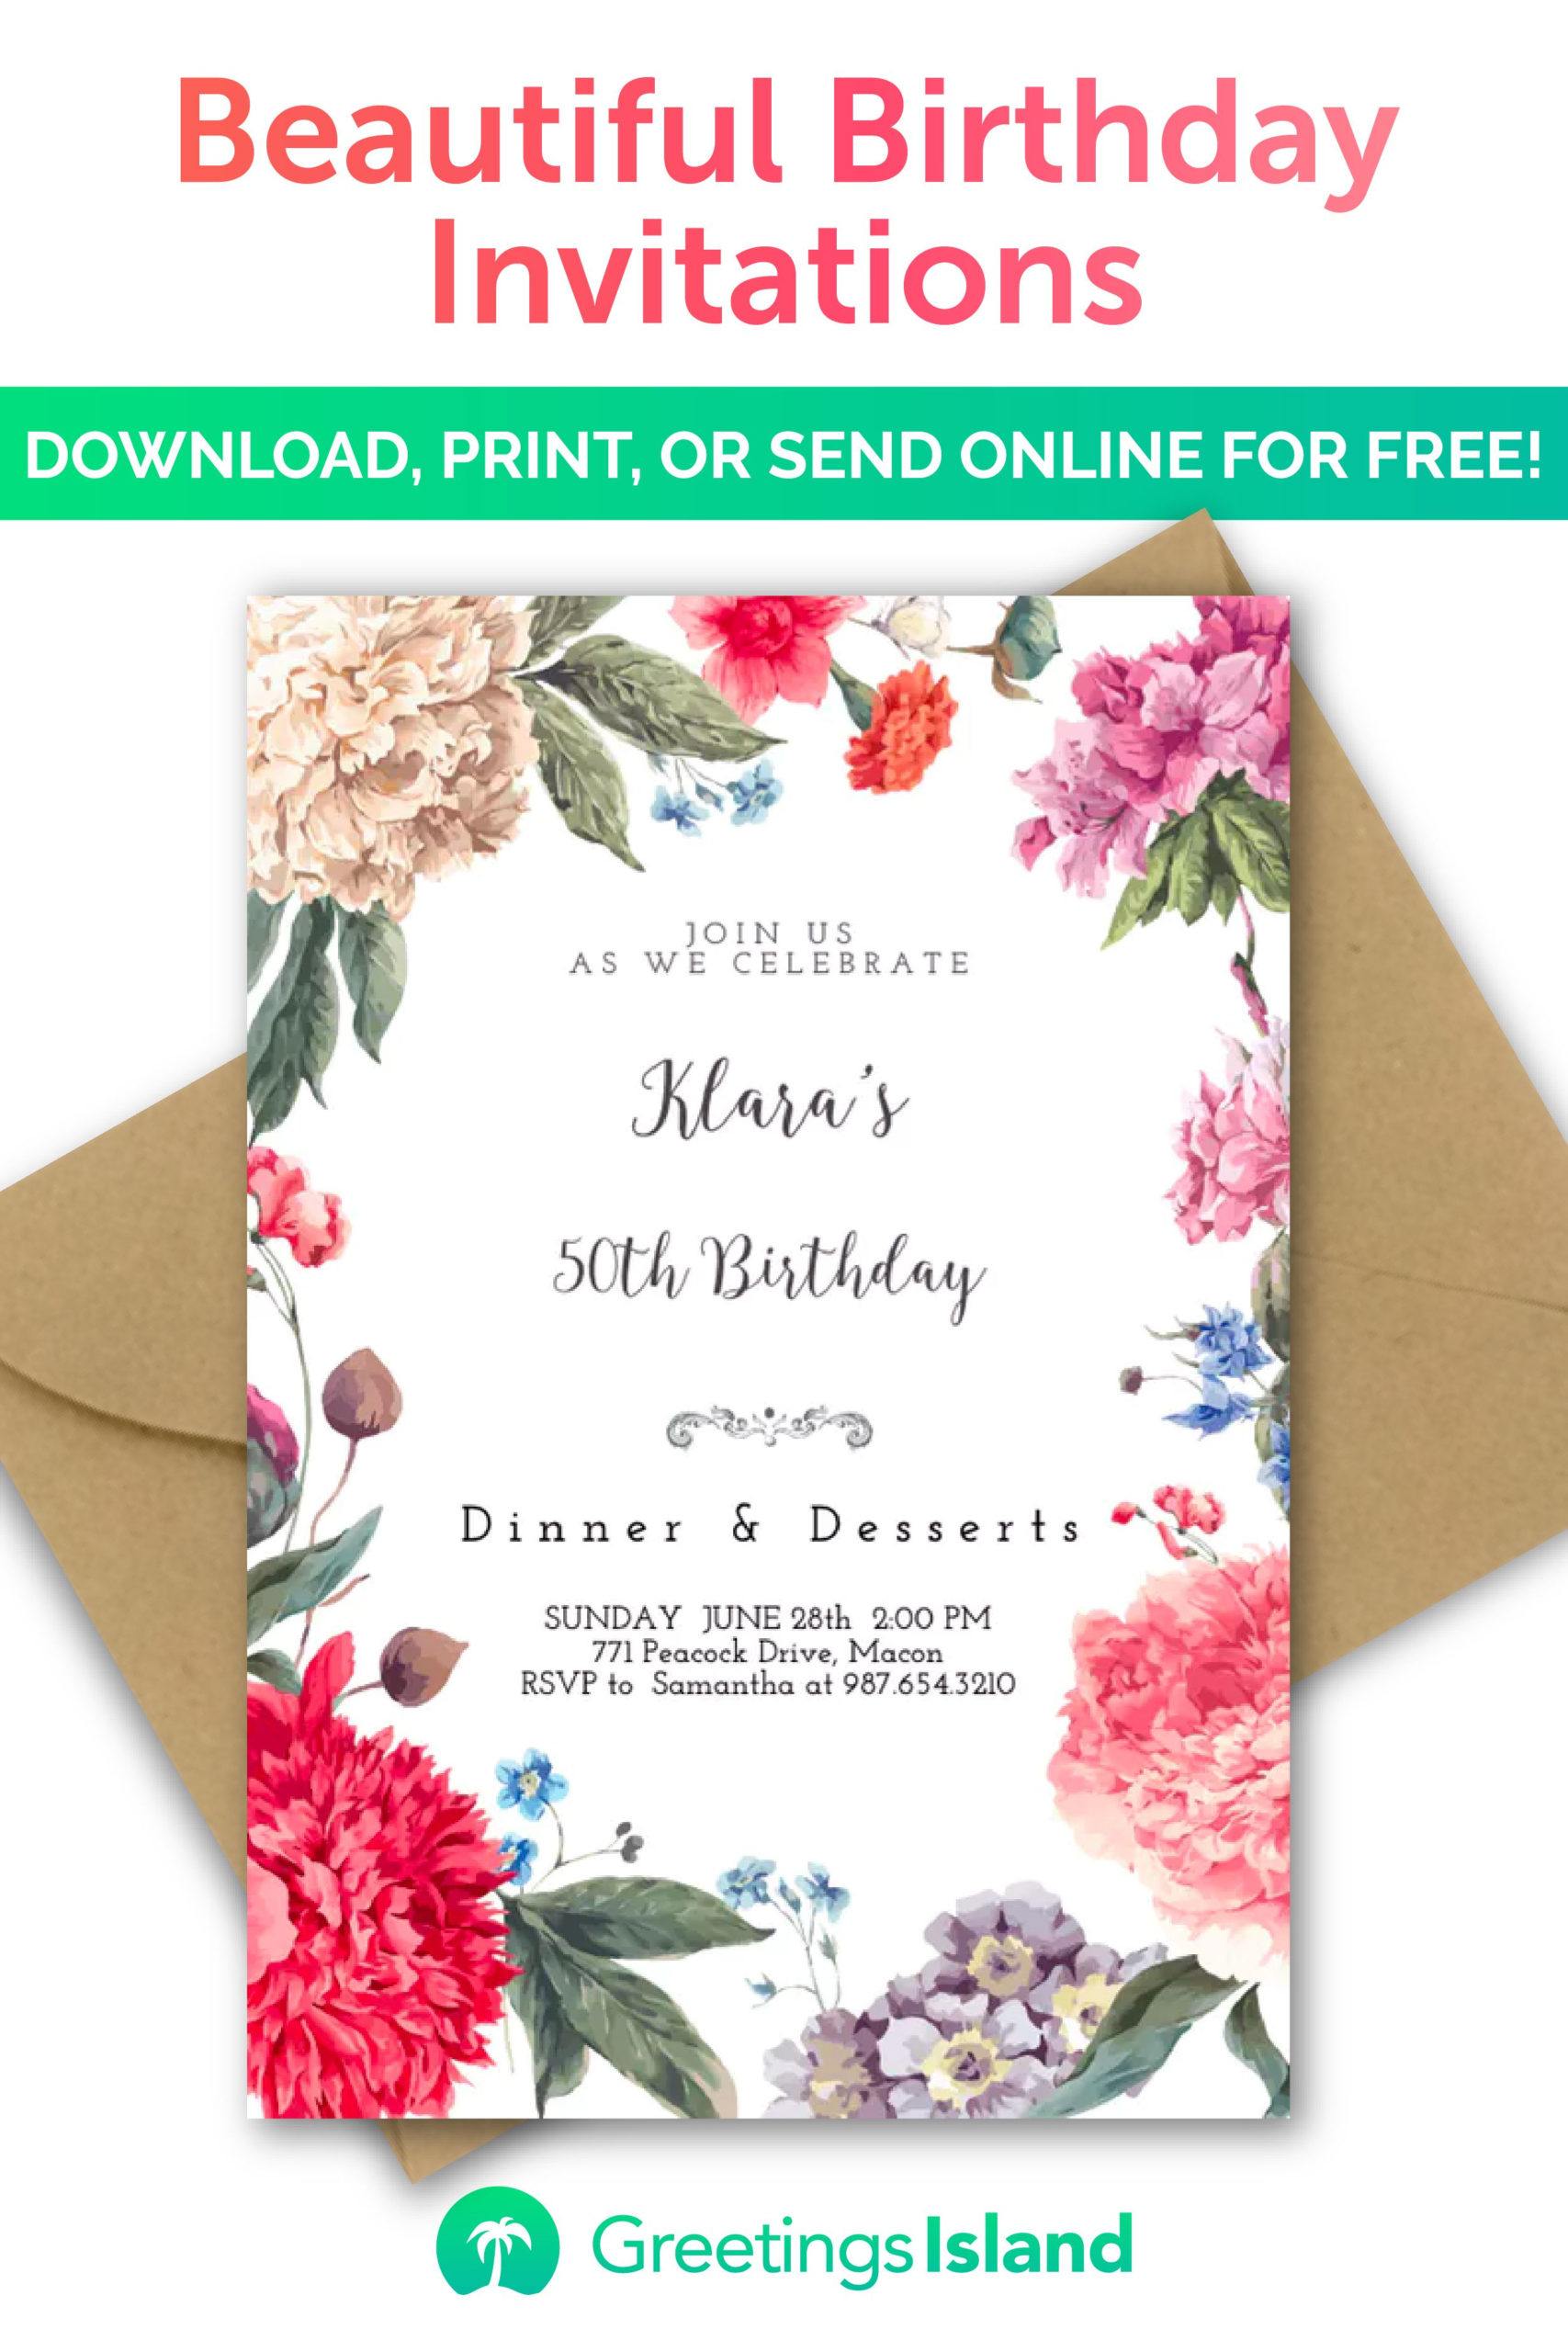 Create Your Own Birthday Invitation In Minutes Download Print Or Send 